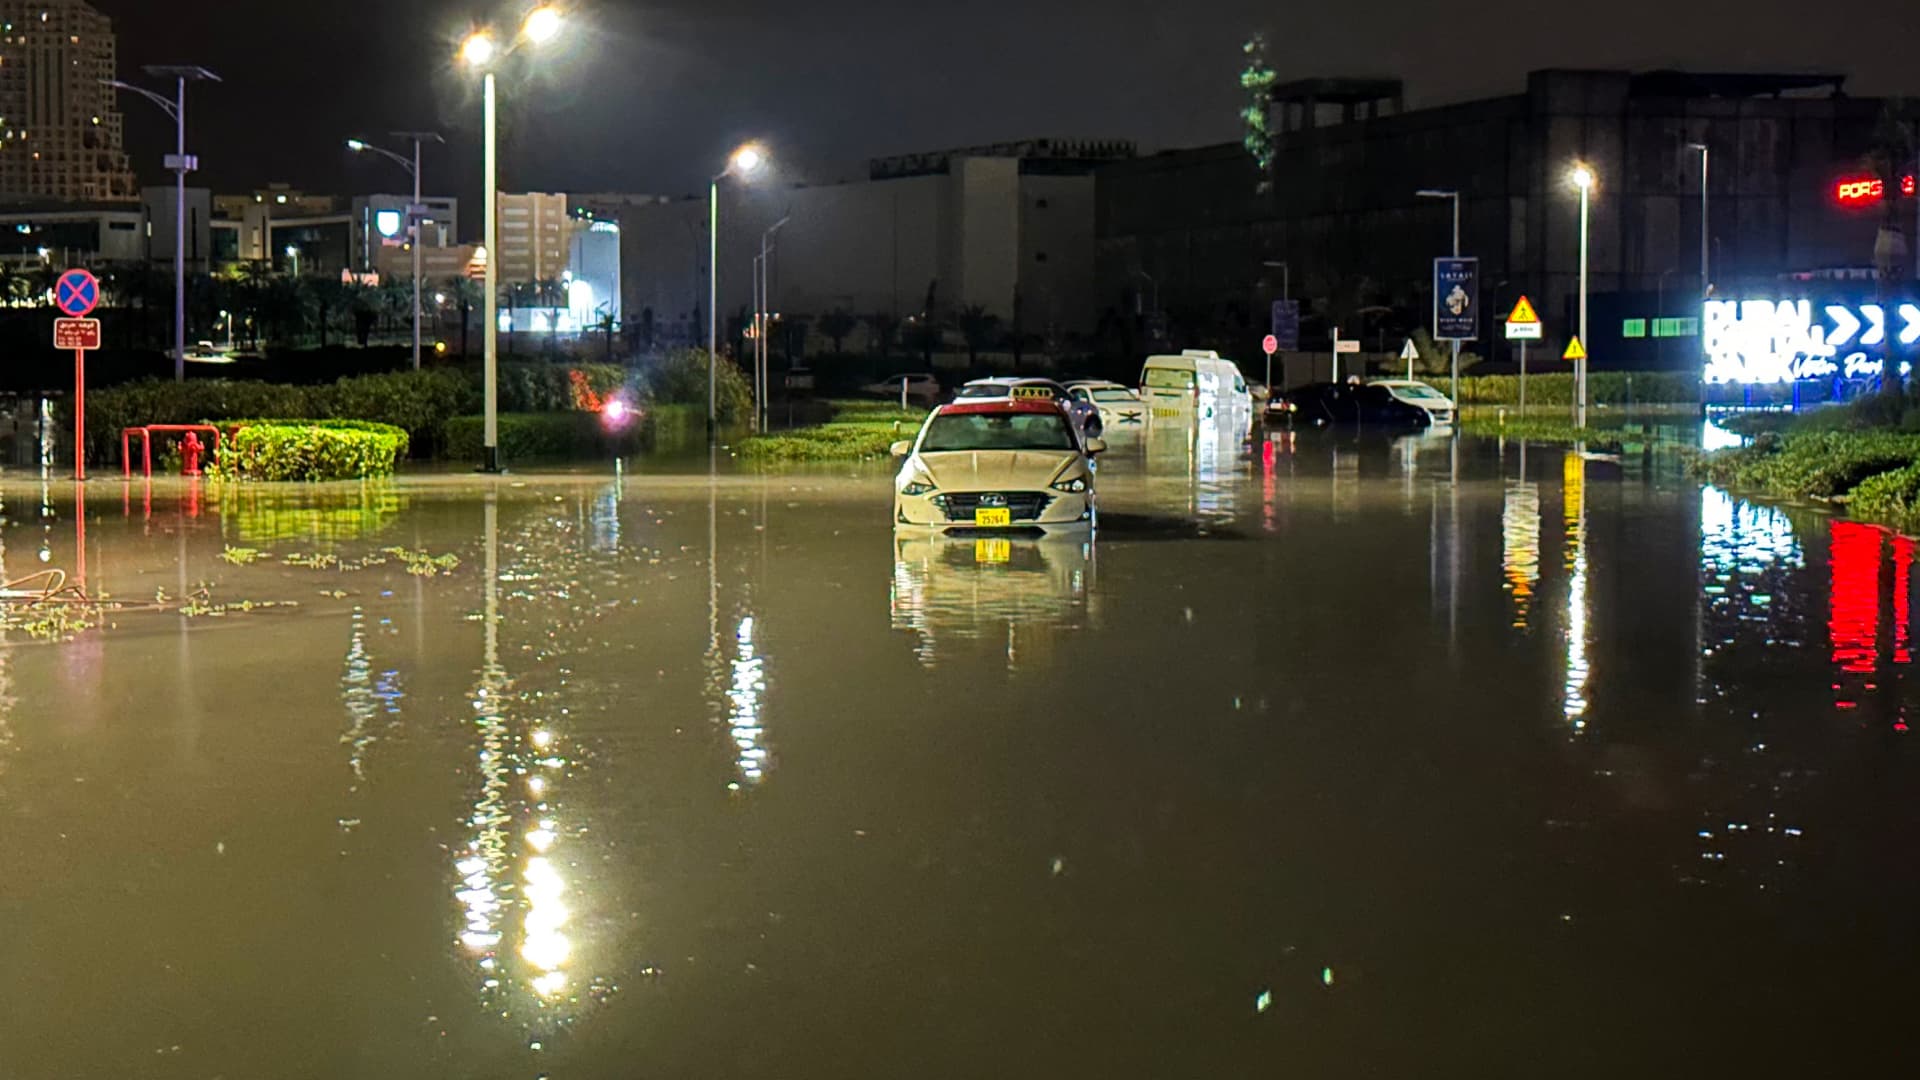 Vehicles are stranded on a flooded street following heavy rains in Dubai early on April 17, 2024. Dubai, the Middle East's financial center, has been paralyzed by the torrential rain that caused floods across the UAE and Bahrain and left 18 dead in Oman on April 14 and 15.